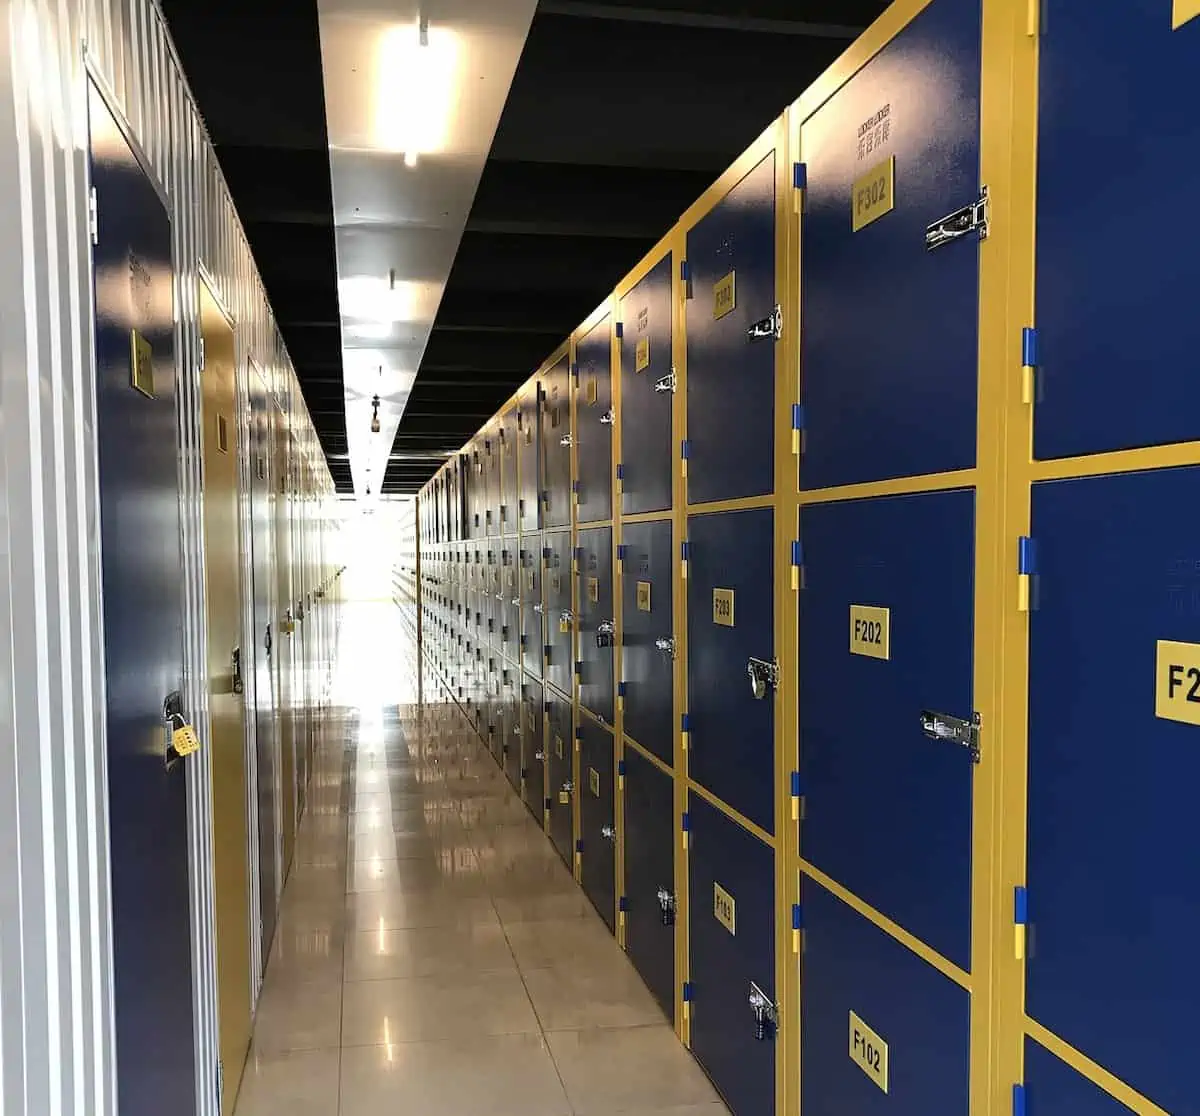 3 Tips to Keep Self-Storage Clean and Organized!